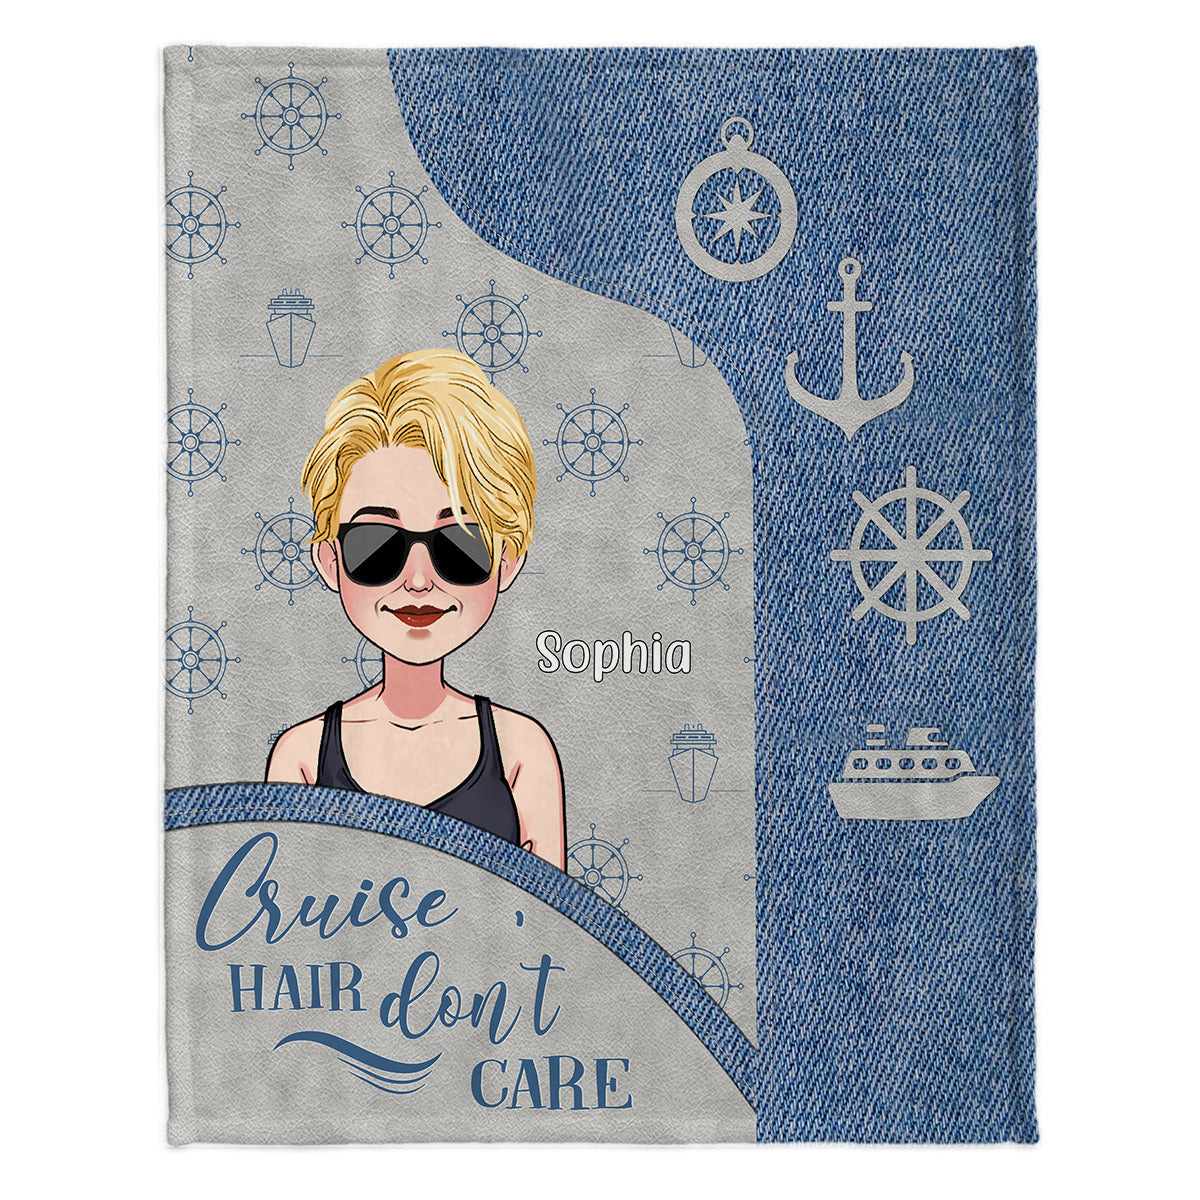 Cruise Hair Don't Care - Personalized Cruising Tote Bag